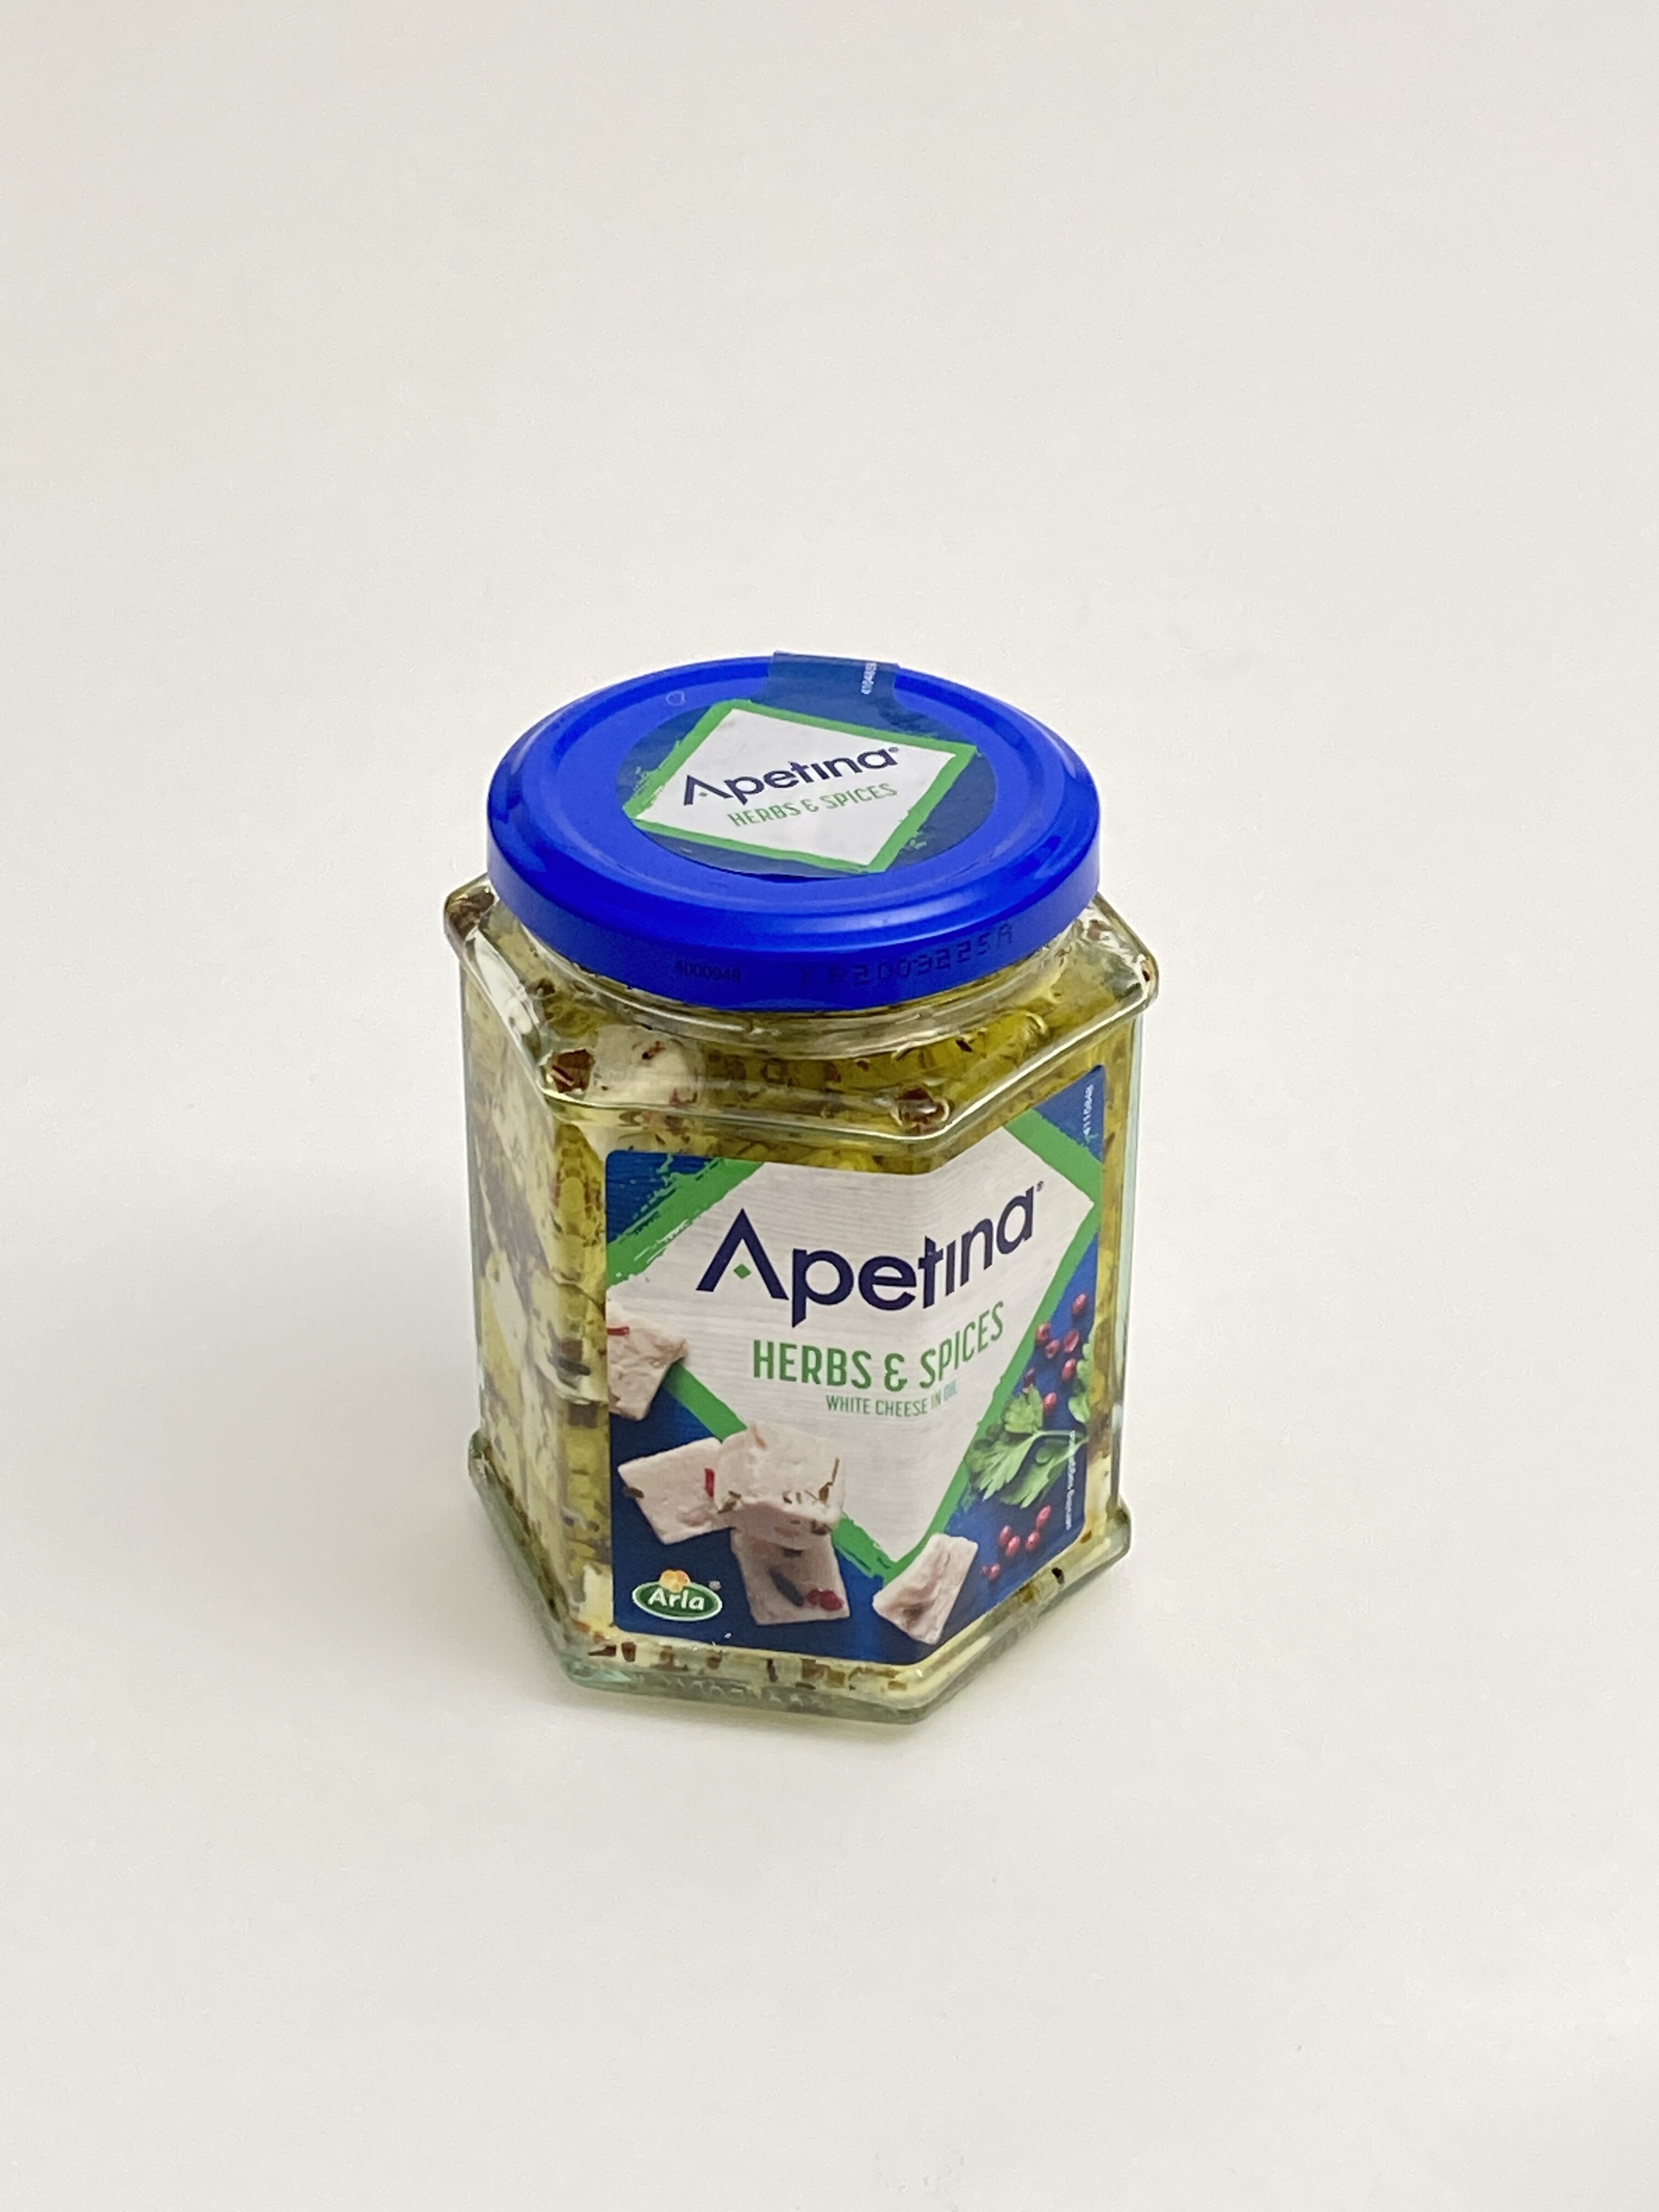 Apetina herbs & spices - Product - en